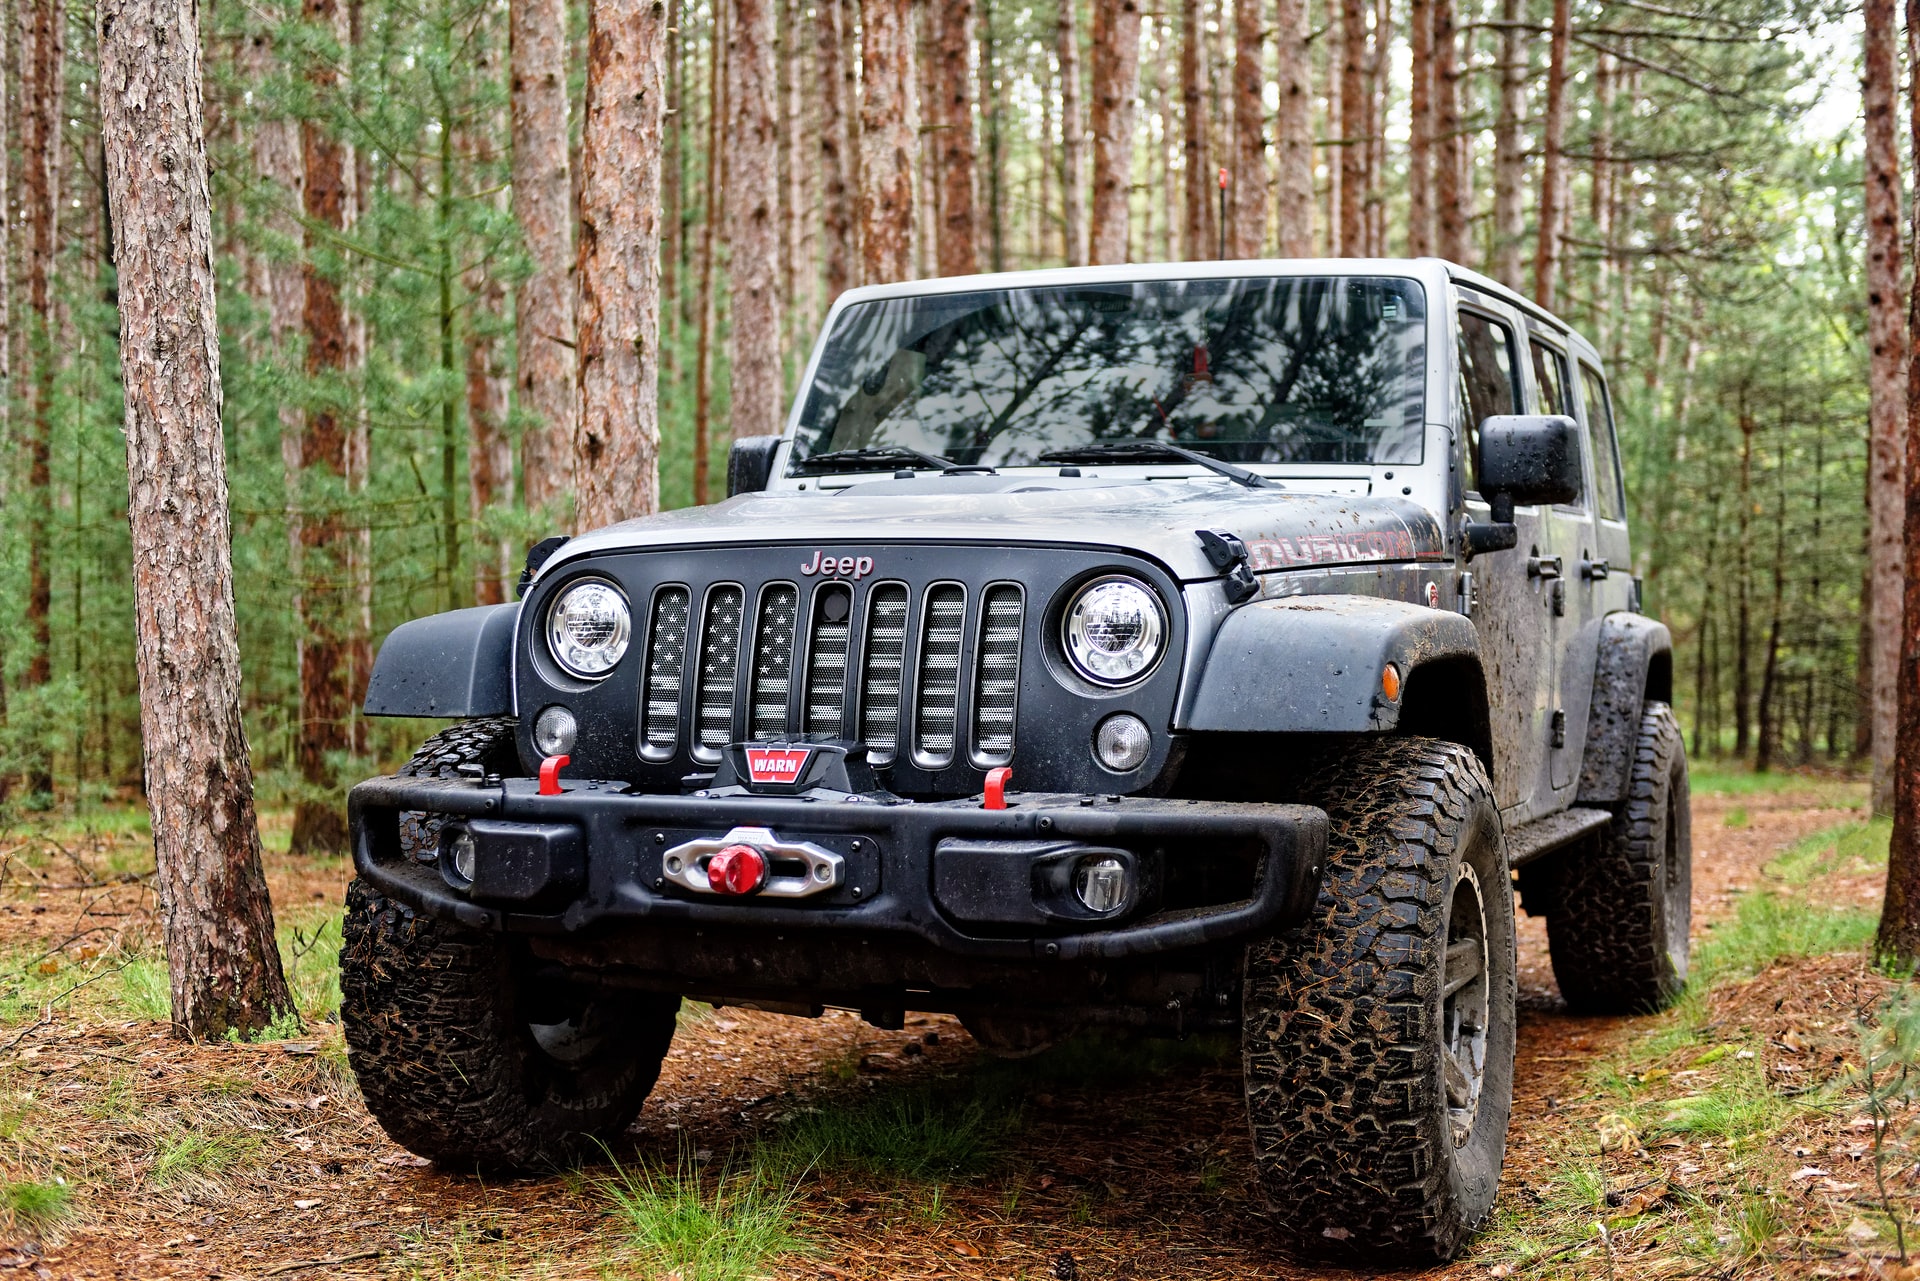 The Best Time to Buy a Jeep Wrangler - Survival Tech Shop